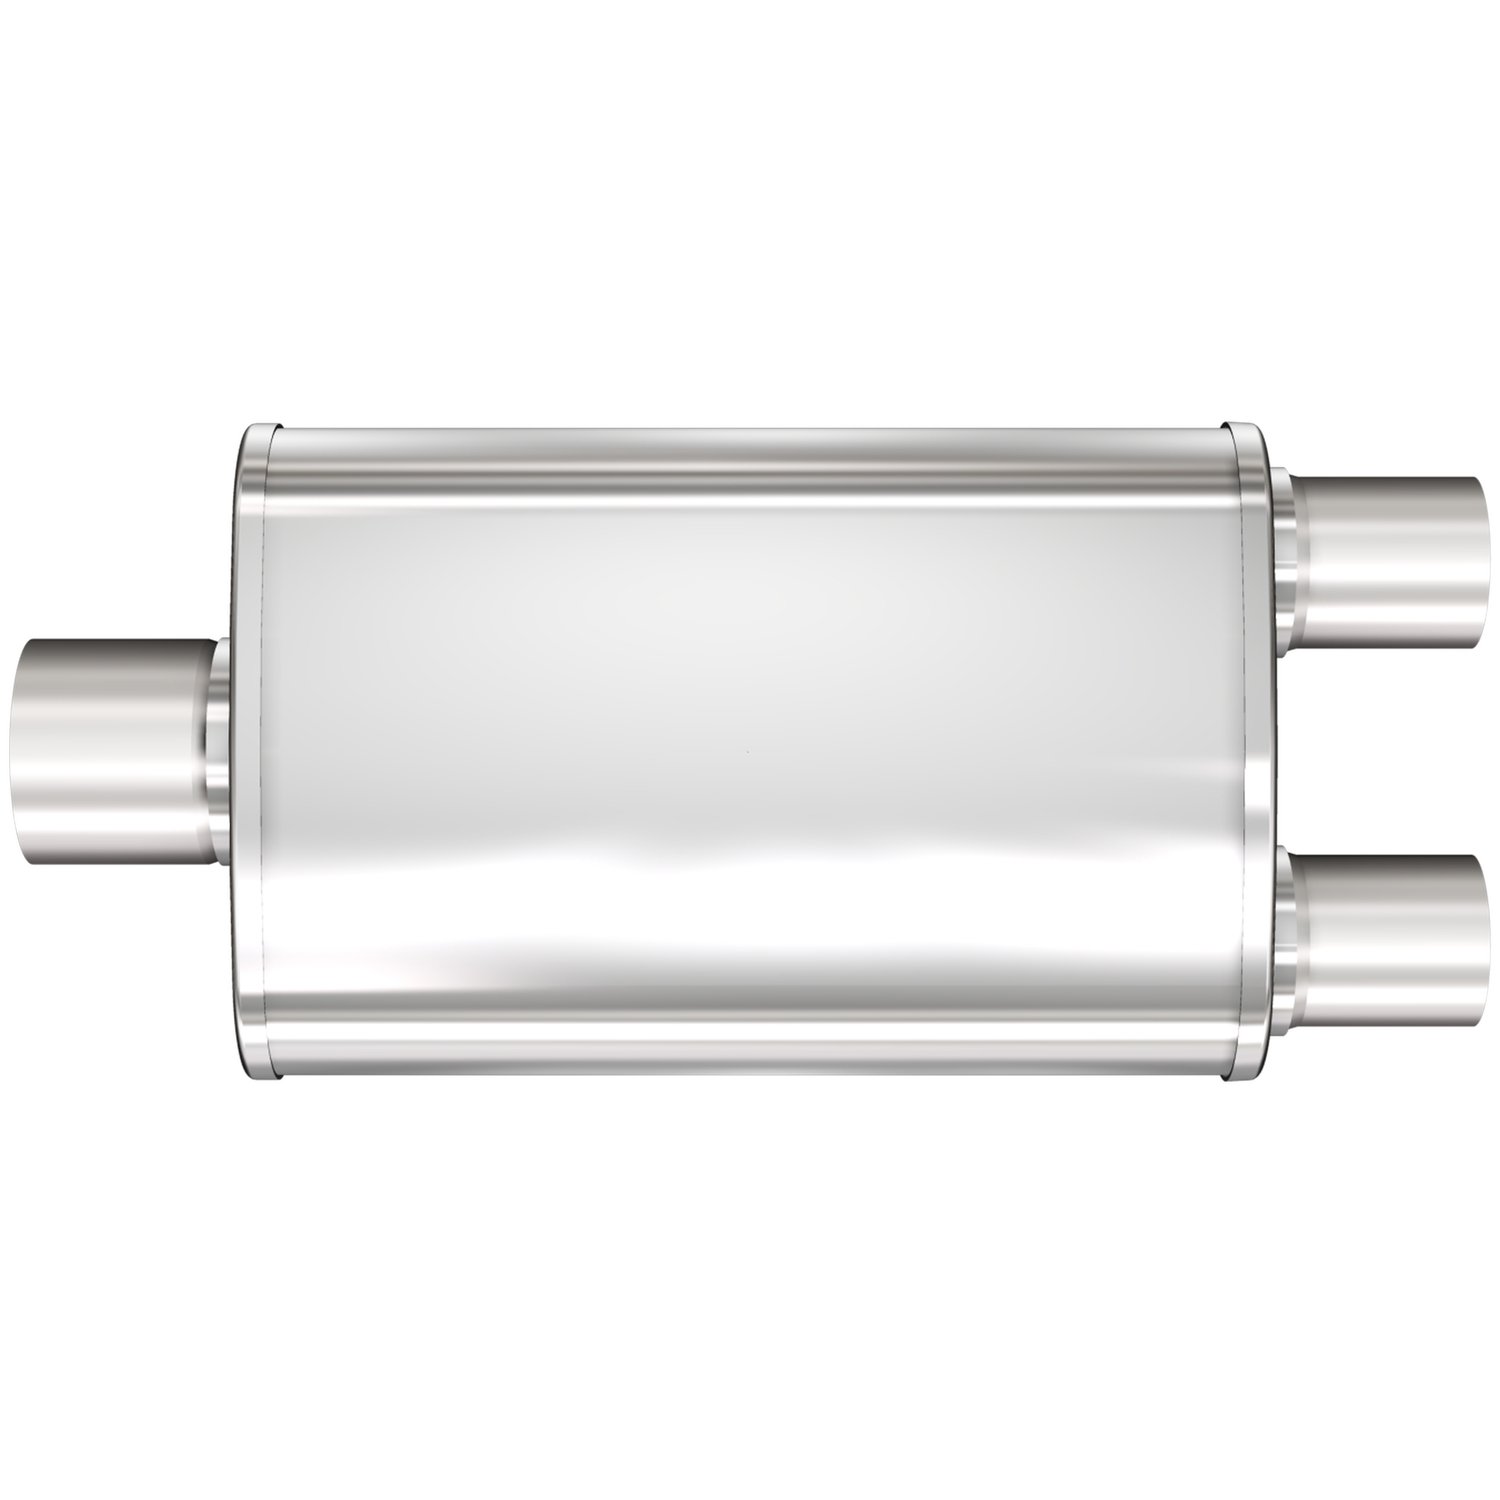 4" x 9" Oval XL 3-Chamber Muffler Single In/Dual Out: 2.25"/2" Body Length: 14" Overall Length: 20" Satin Finish